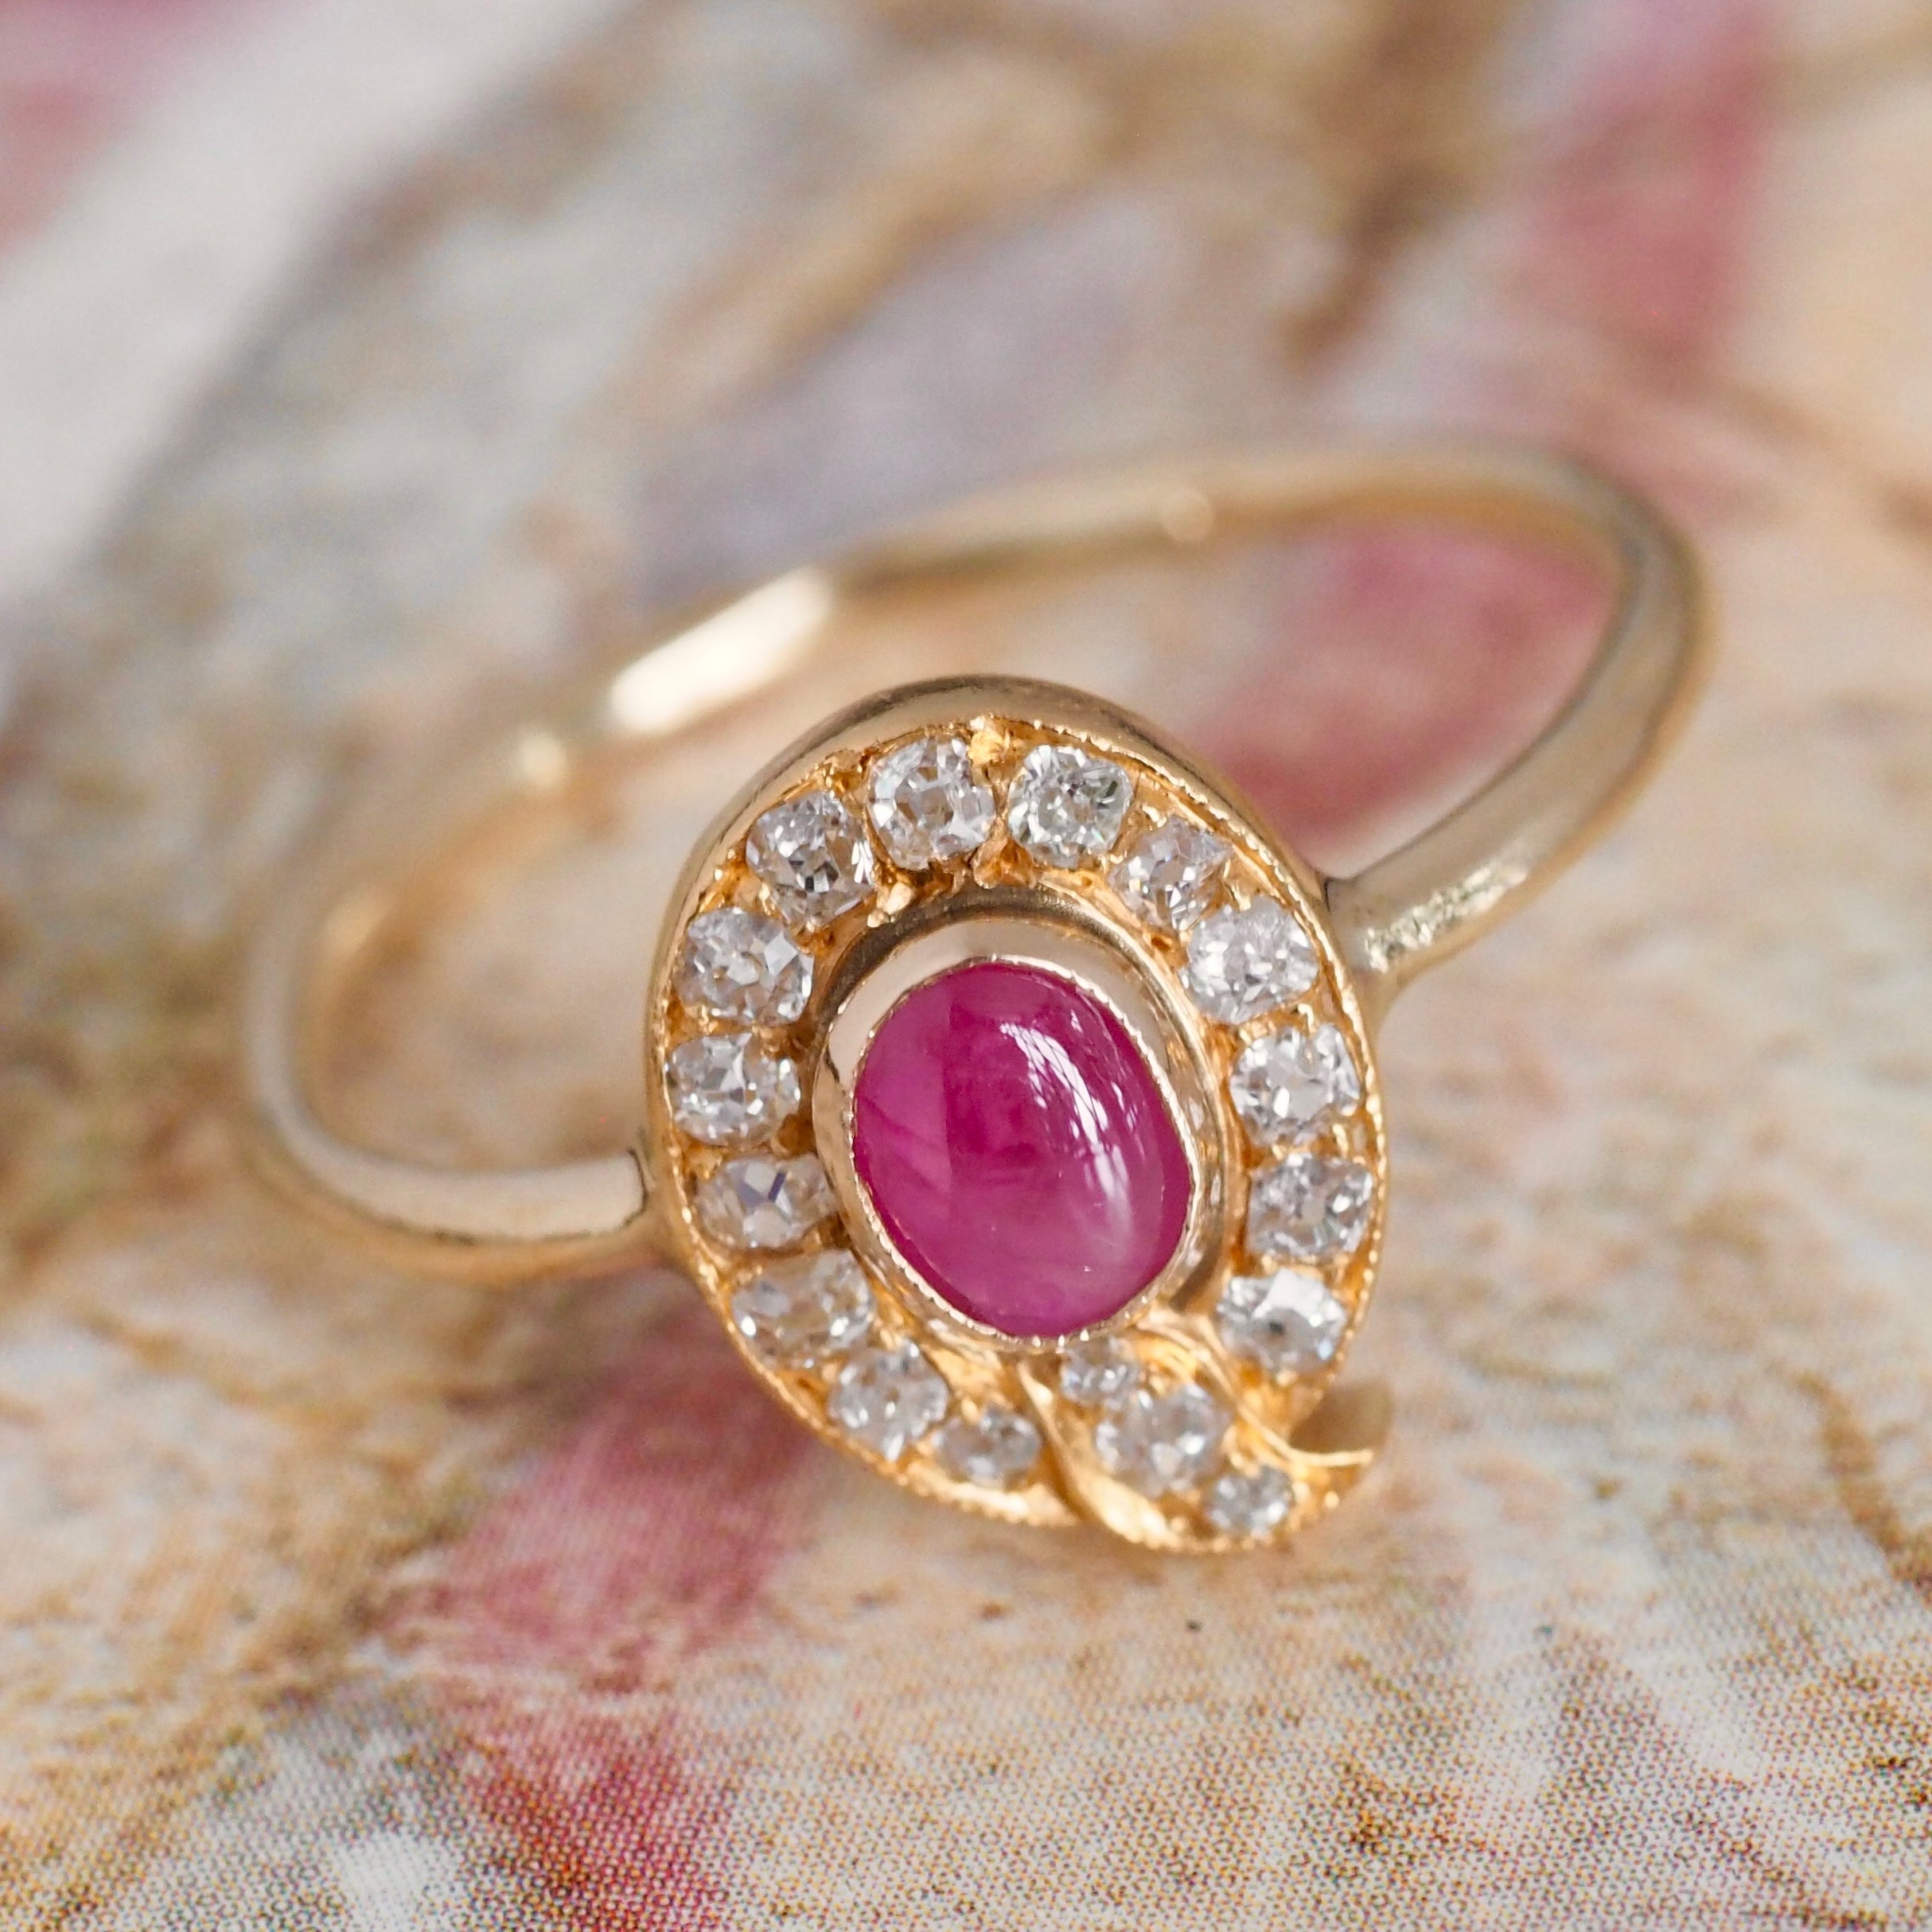 Antique 14k Gold Natural Ruby Old Mine Cut Diamond Q Ring